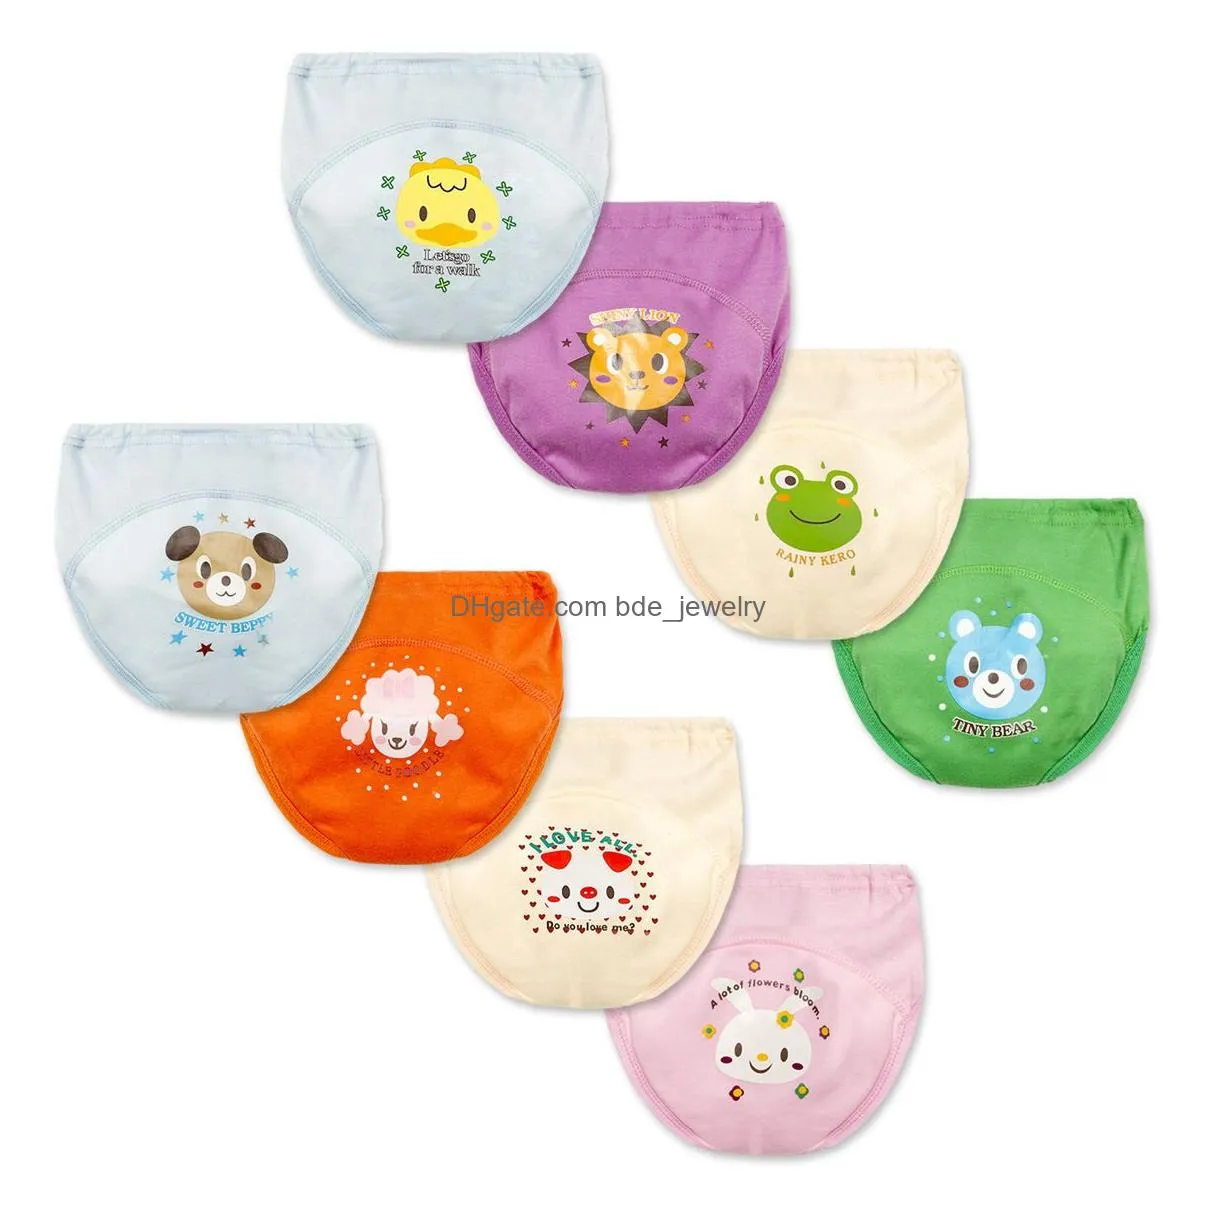 cloth diapers 8pcs/lot four layers toilet potty training for baby reusable waterproof toddler nappy panties boy girl short briefs coward